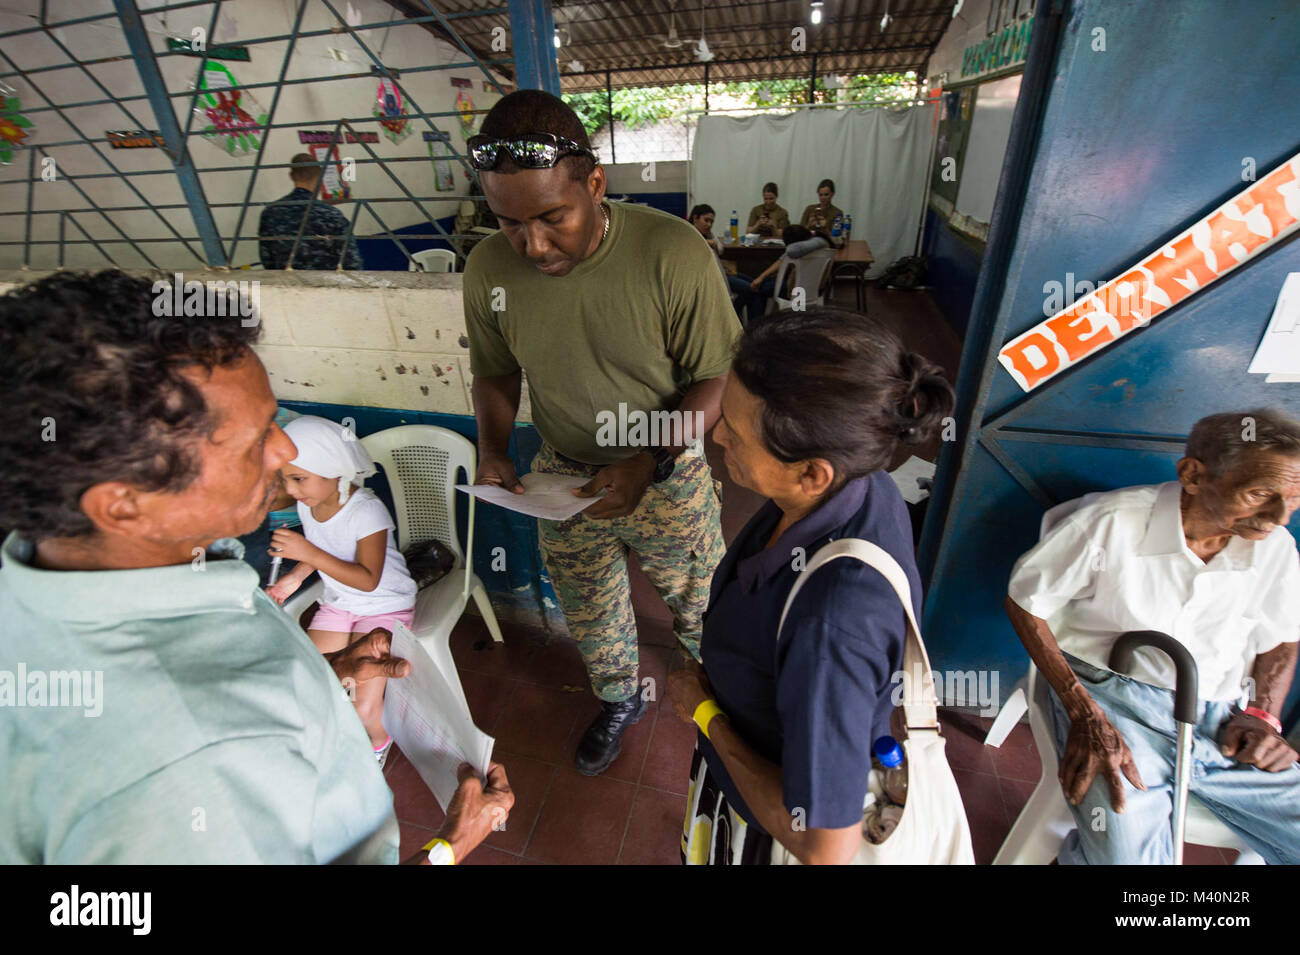 150617-N-PD309-194 SAN JULIAN, El Salvador (June 17, 2015) Leading Seaman Joseph Pugh, a combat medic with the Royal Bahamas Defense Force, directs patients to appropriate care rooms at a medical site established at Centro Escolar Doctor Eduardo Enrique Barriento during Continuing Promise 2015. Partner nation military members are working alongside U.S. service members to support CP-15. Continuing Promise is a U.S. Southern Command-sponsored and U.S. Naval Forces Southern Command/U.S. 4th Fleet-conducted deployment to conduct civil-military operations including humanitarian-civil assistance, su Stock Photo